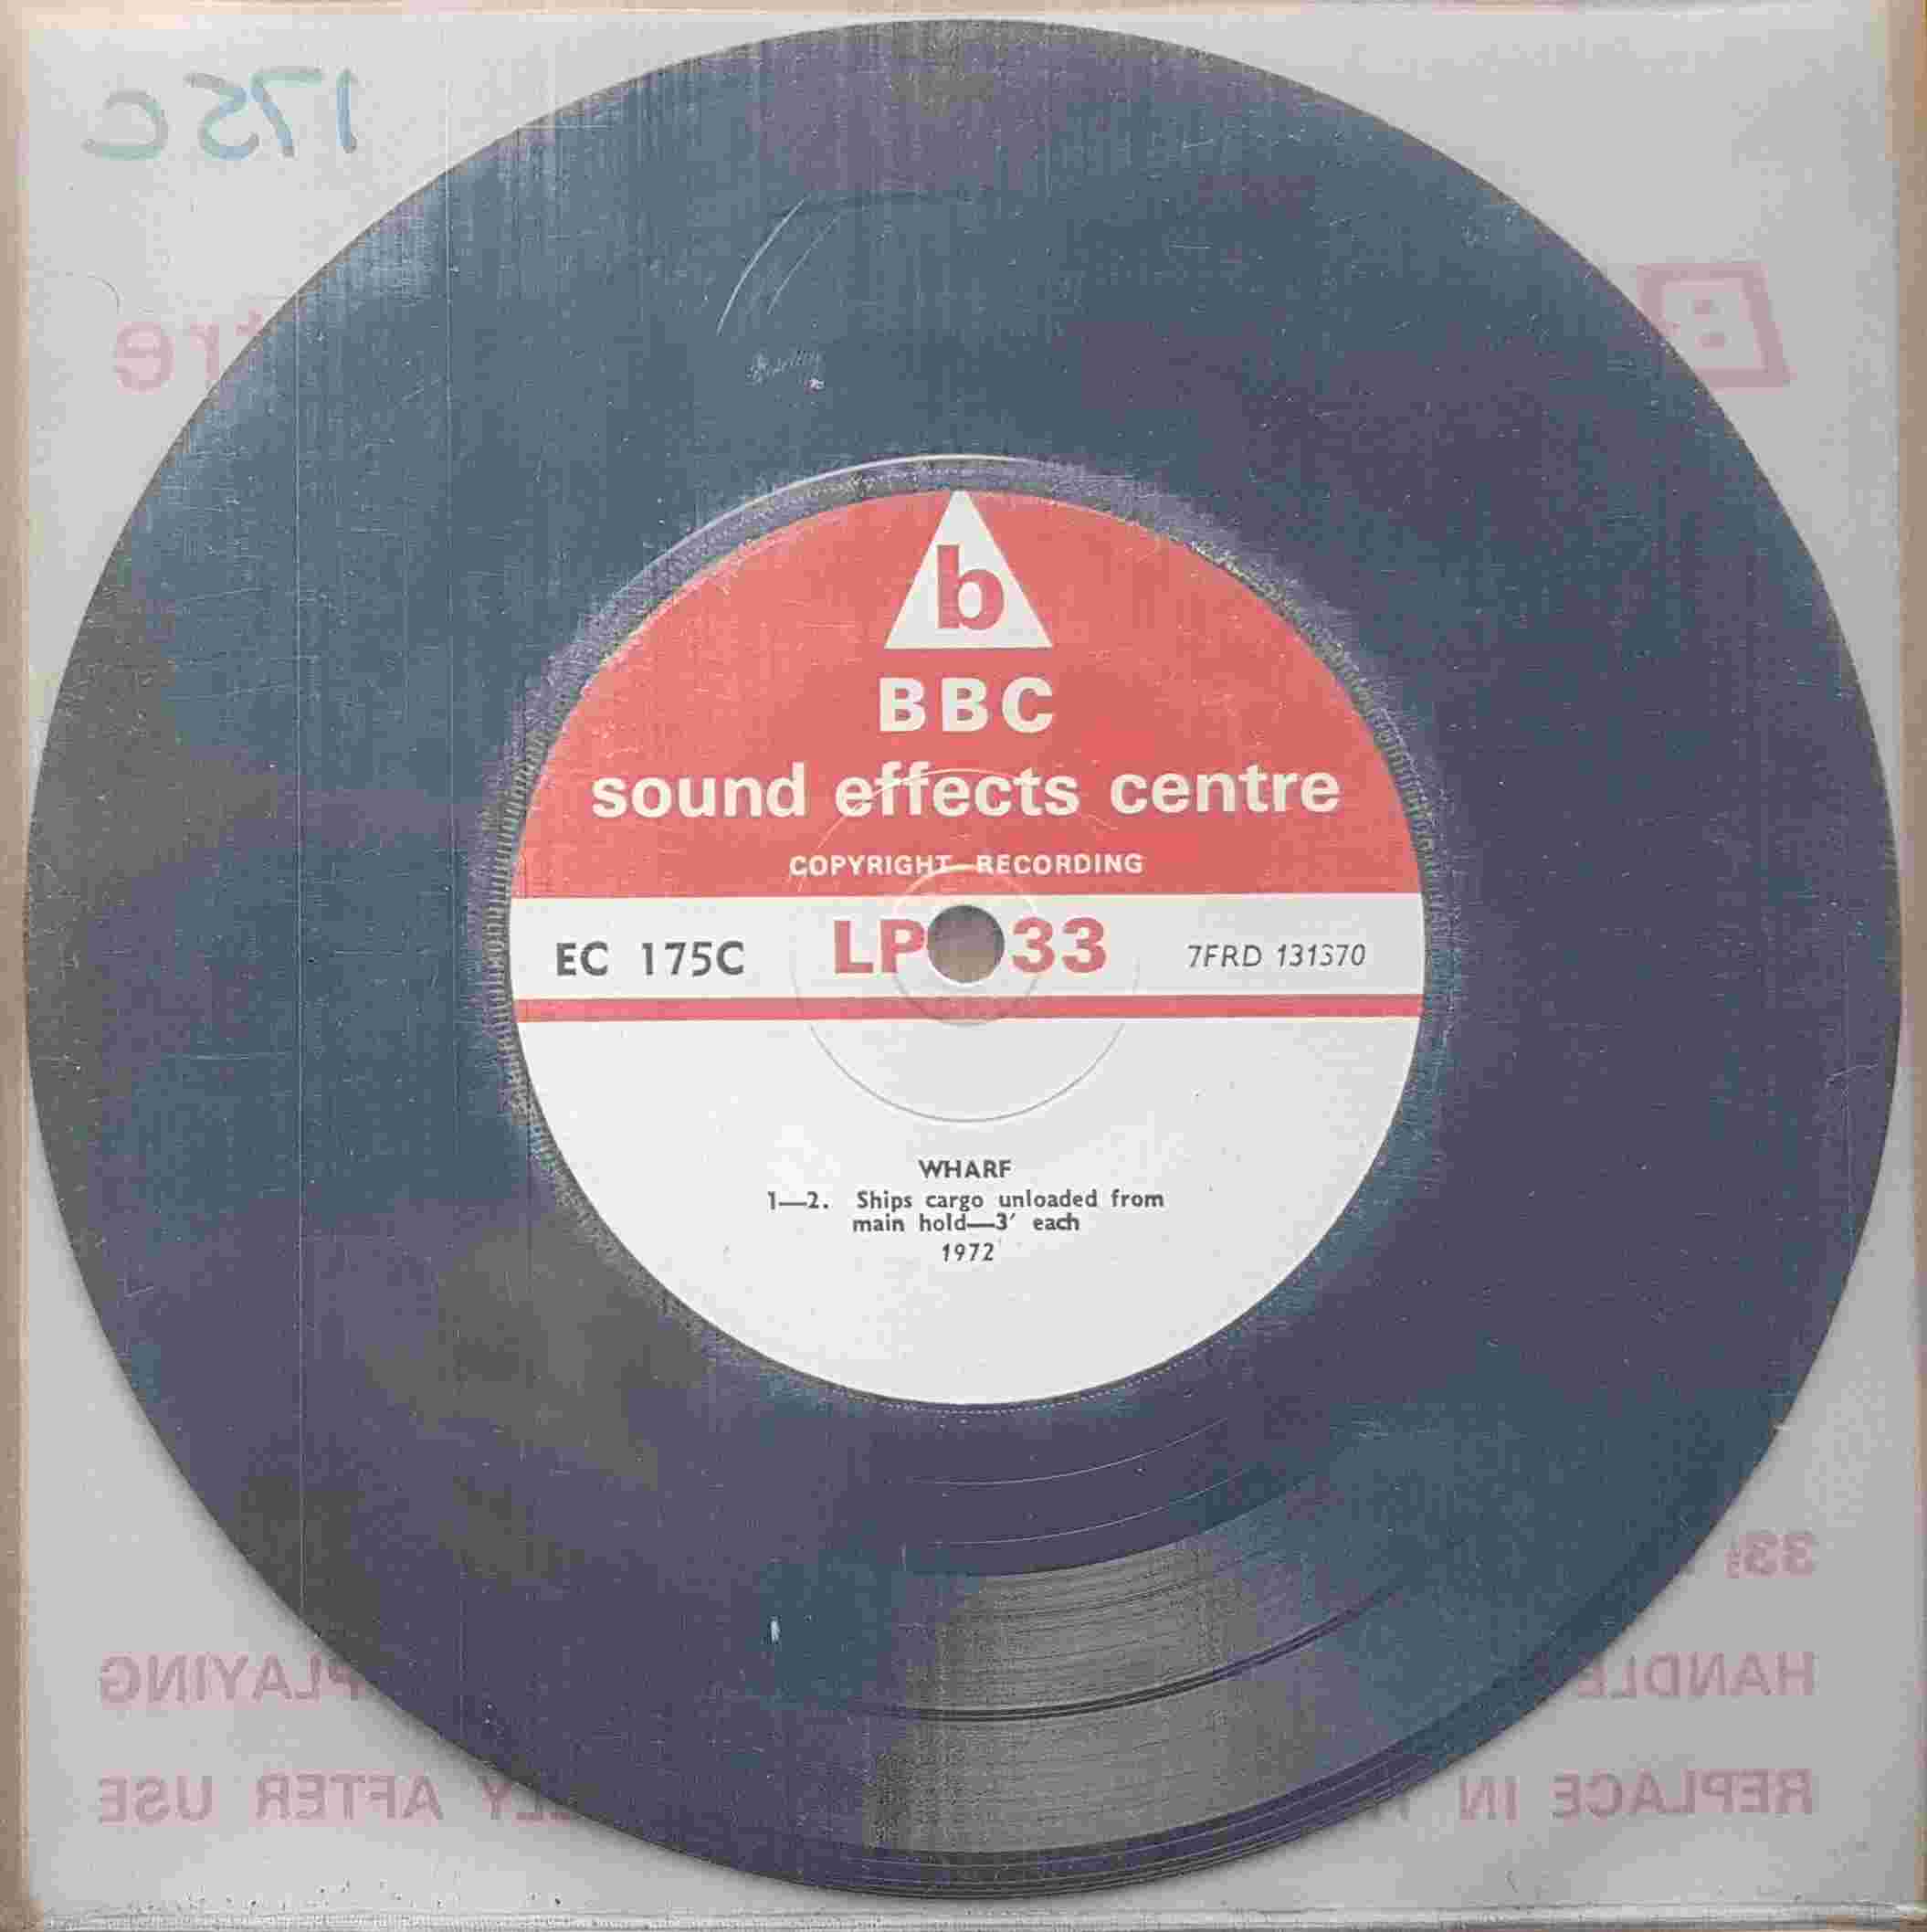 Picture of EC 175C Wharf by artist Not registered from the BBC records and Tapes library